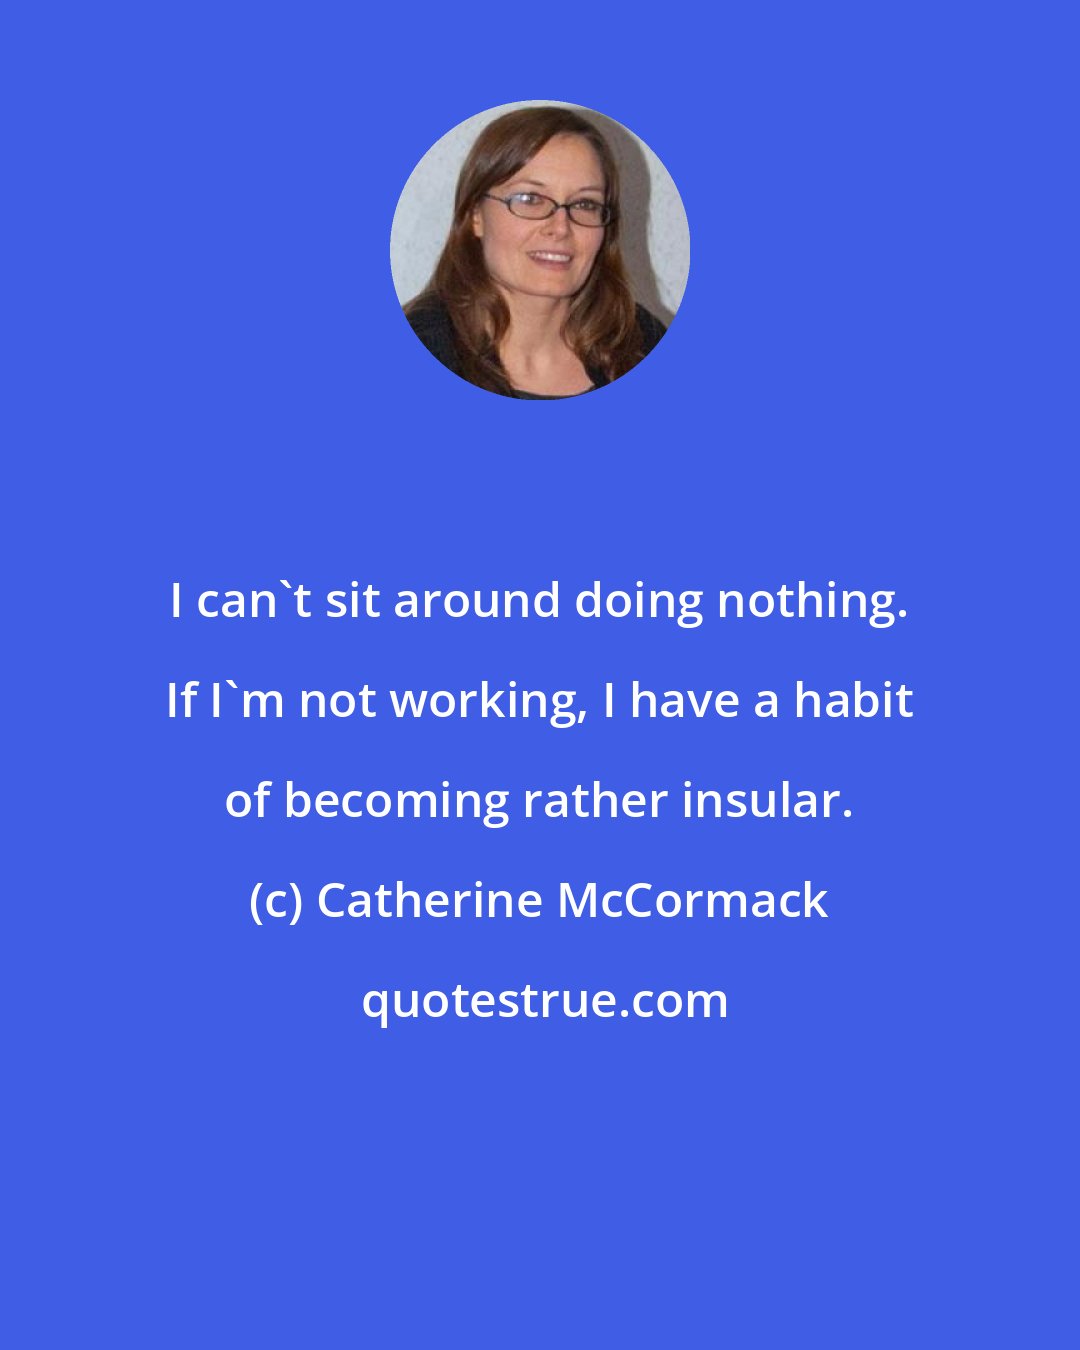 Catherine McCormack: I can't sit around doing nothing. If I'm not working, I have a habit of becoming rather insular.